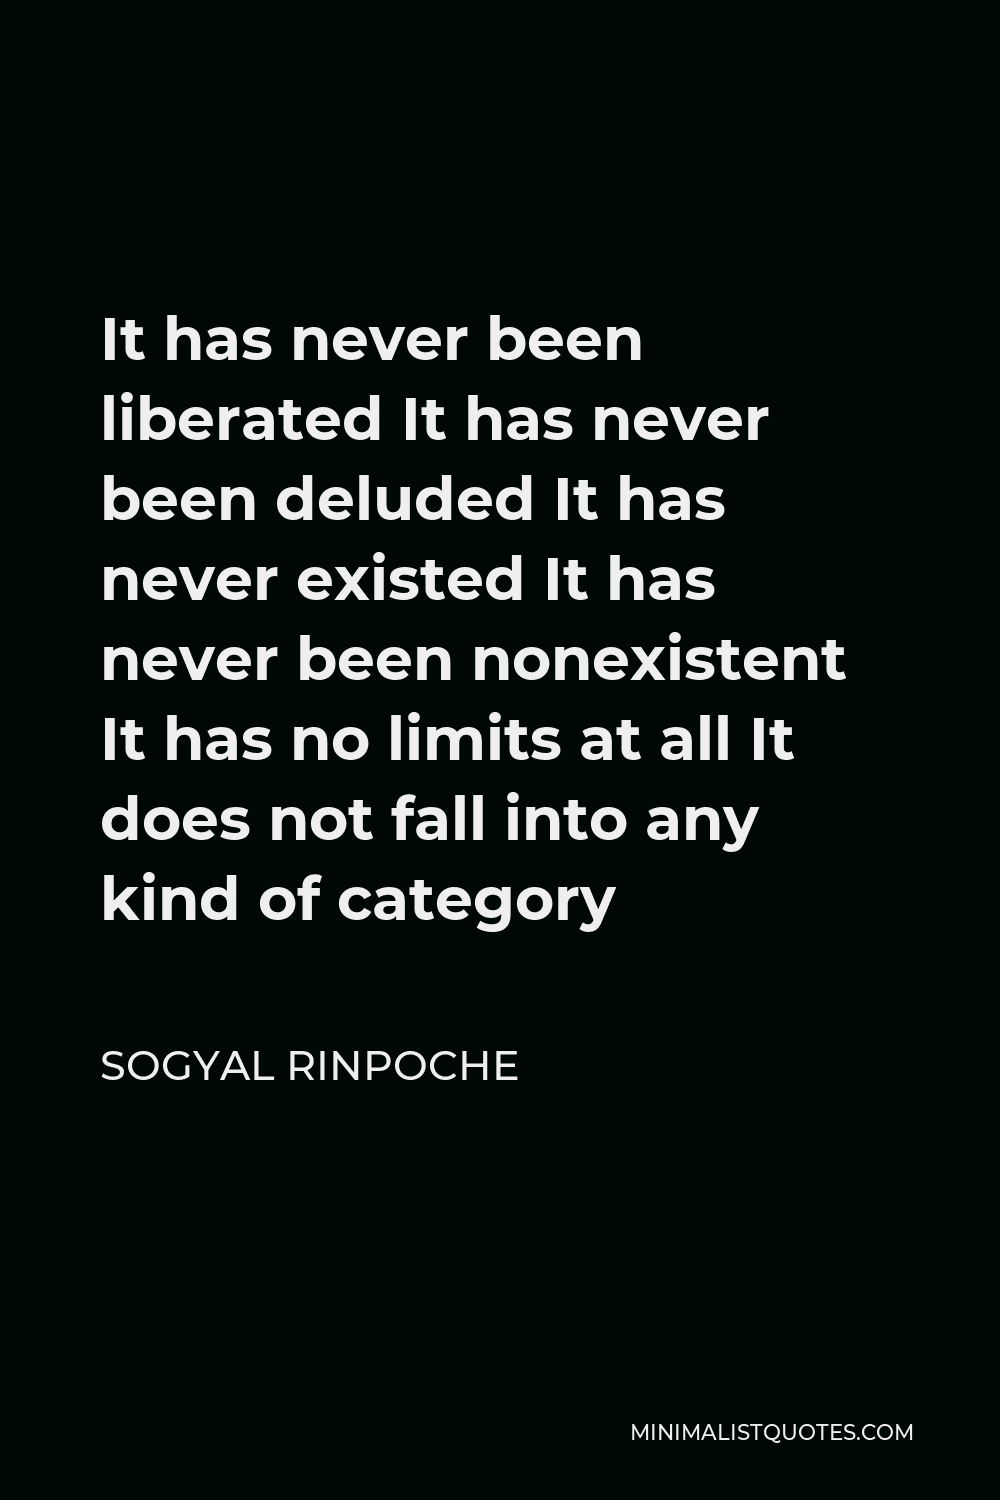 Sogyal Rinpoche Quote - It has never been liberated It has never been deluded It has never existed It has never been nonexistent It has no limits at all It does not fall into any kind of category